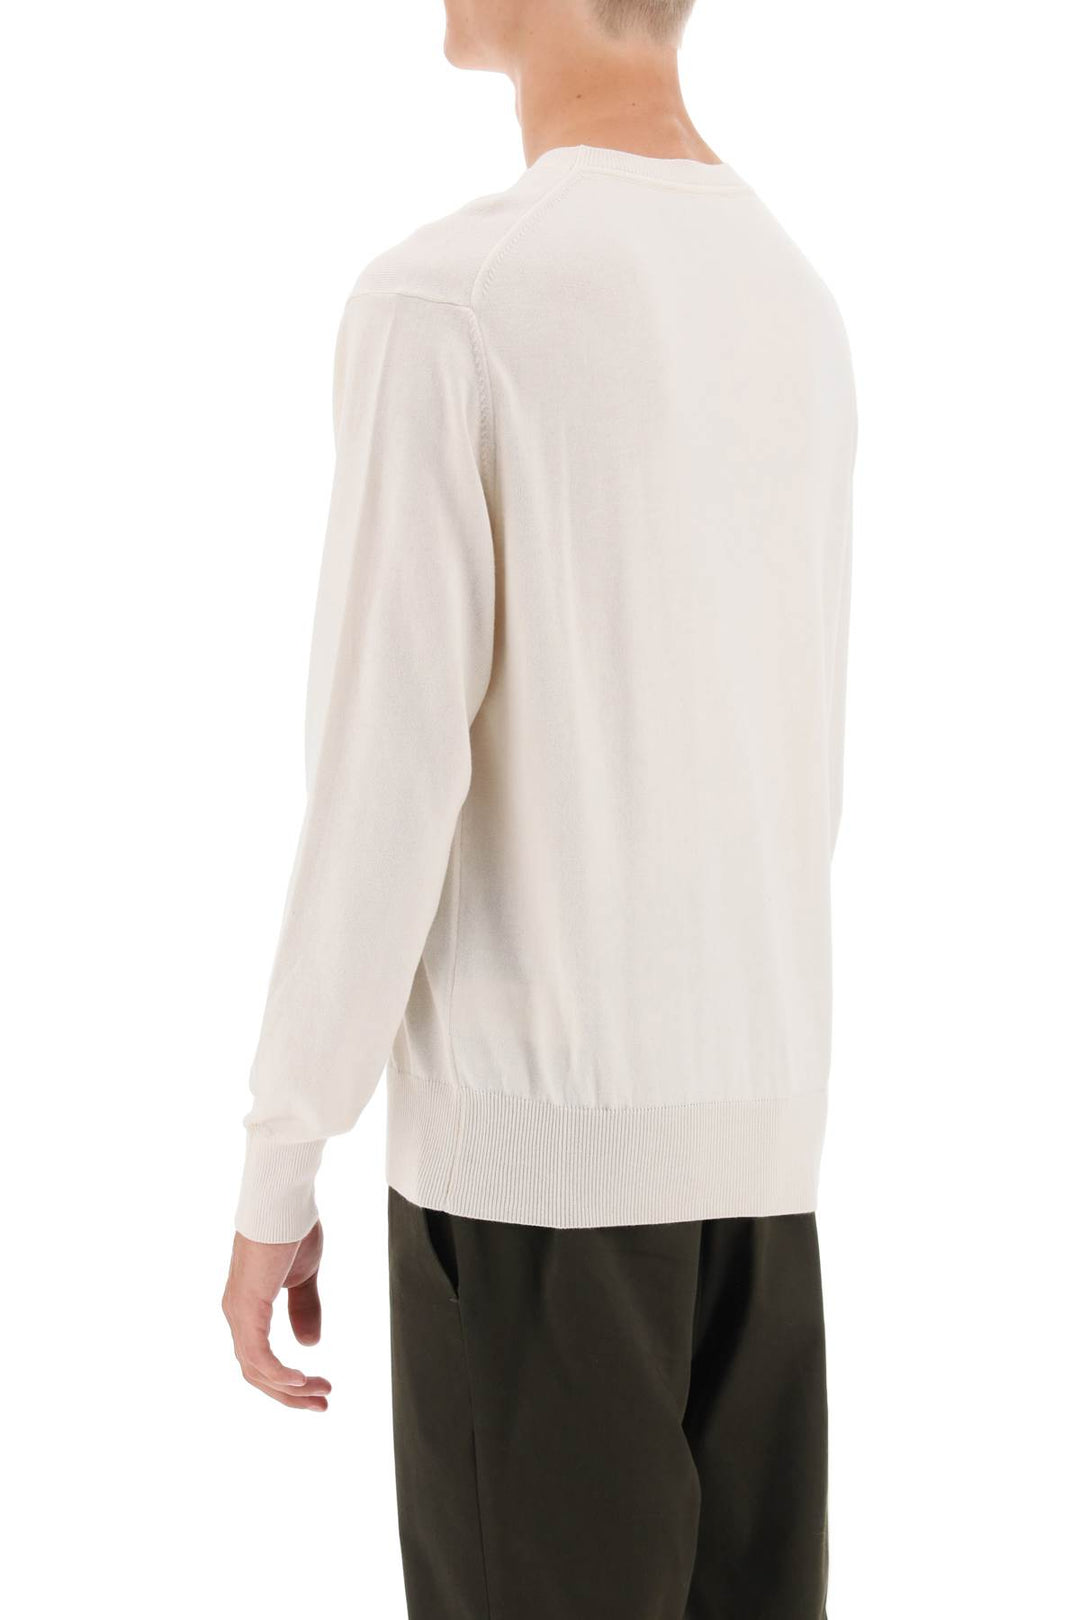 Vivienne Westwood Organic Cotton And Cashmere Sweater   Bianco